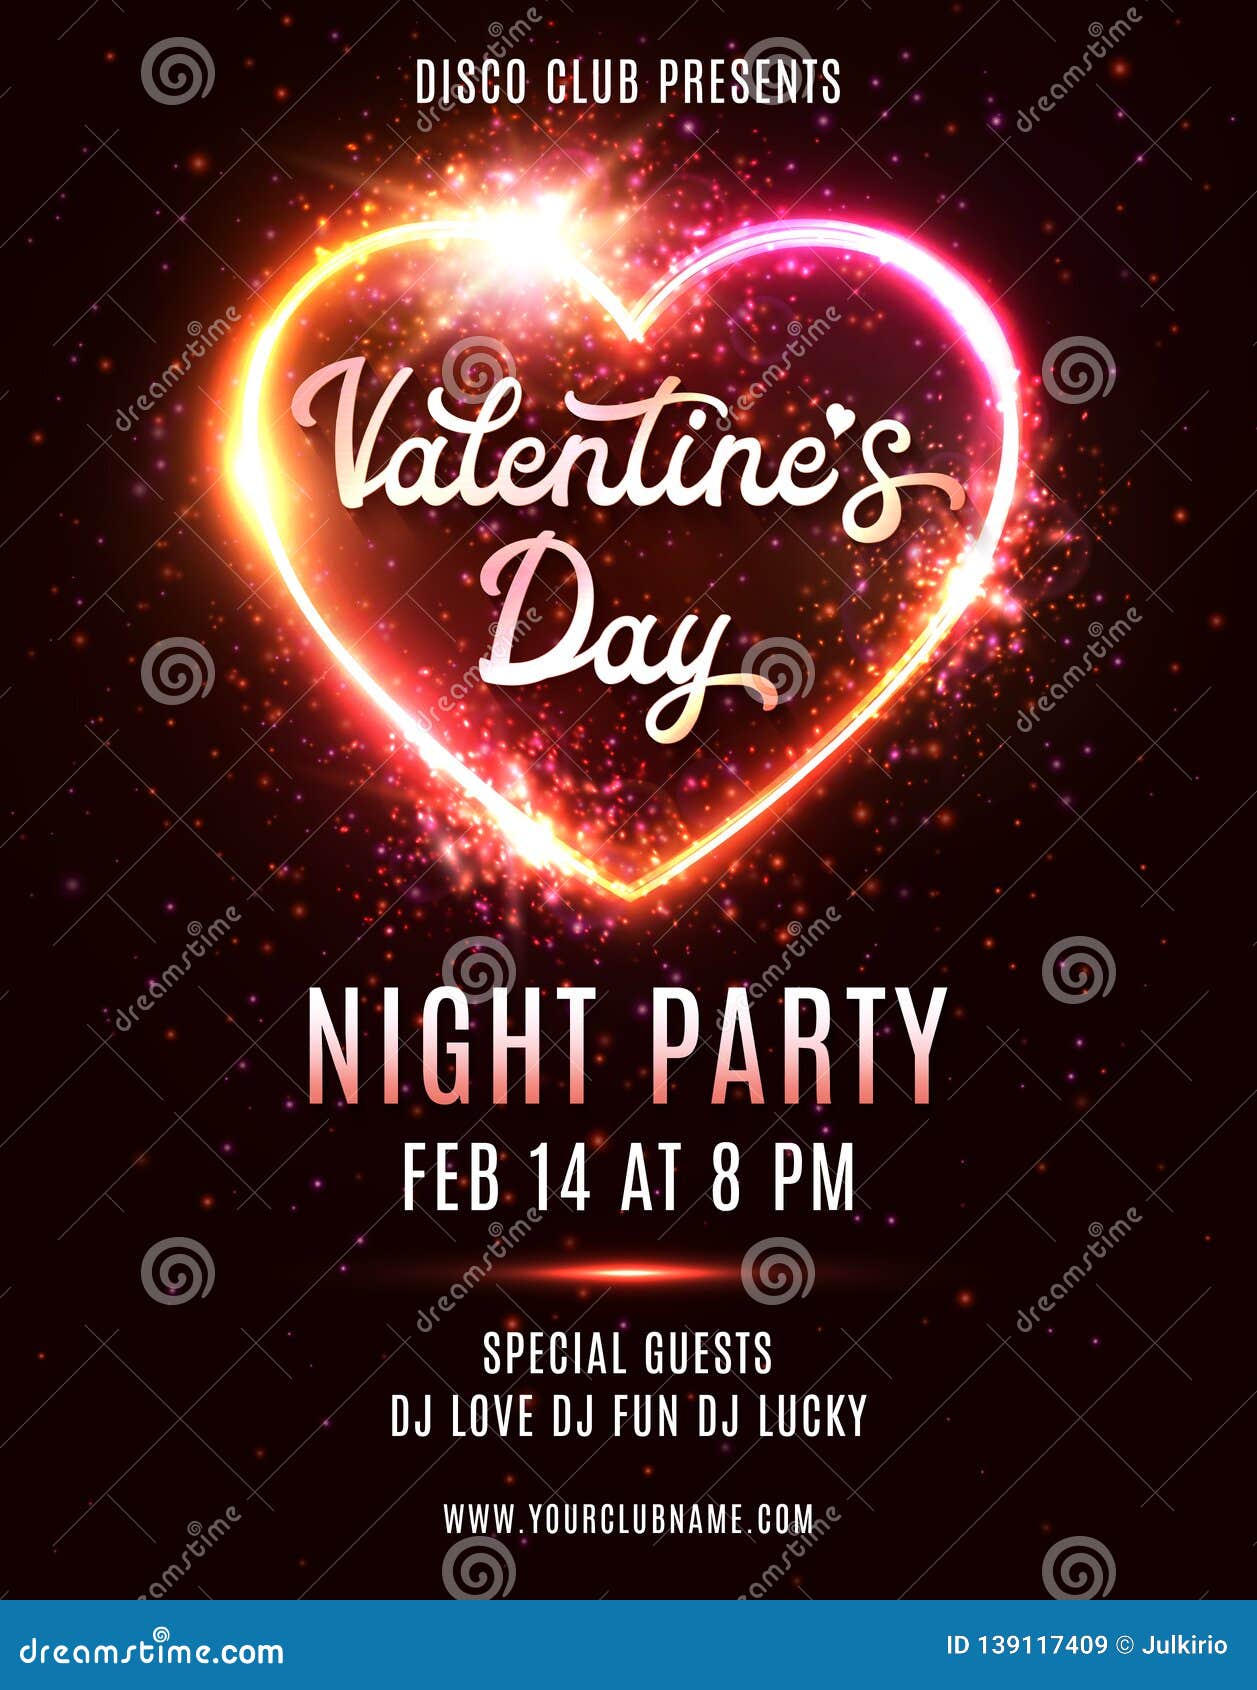 Valentines Day Party Poster Disco Music Dance Stock Vector Illustration Of Love Holiday 139117409